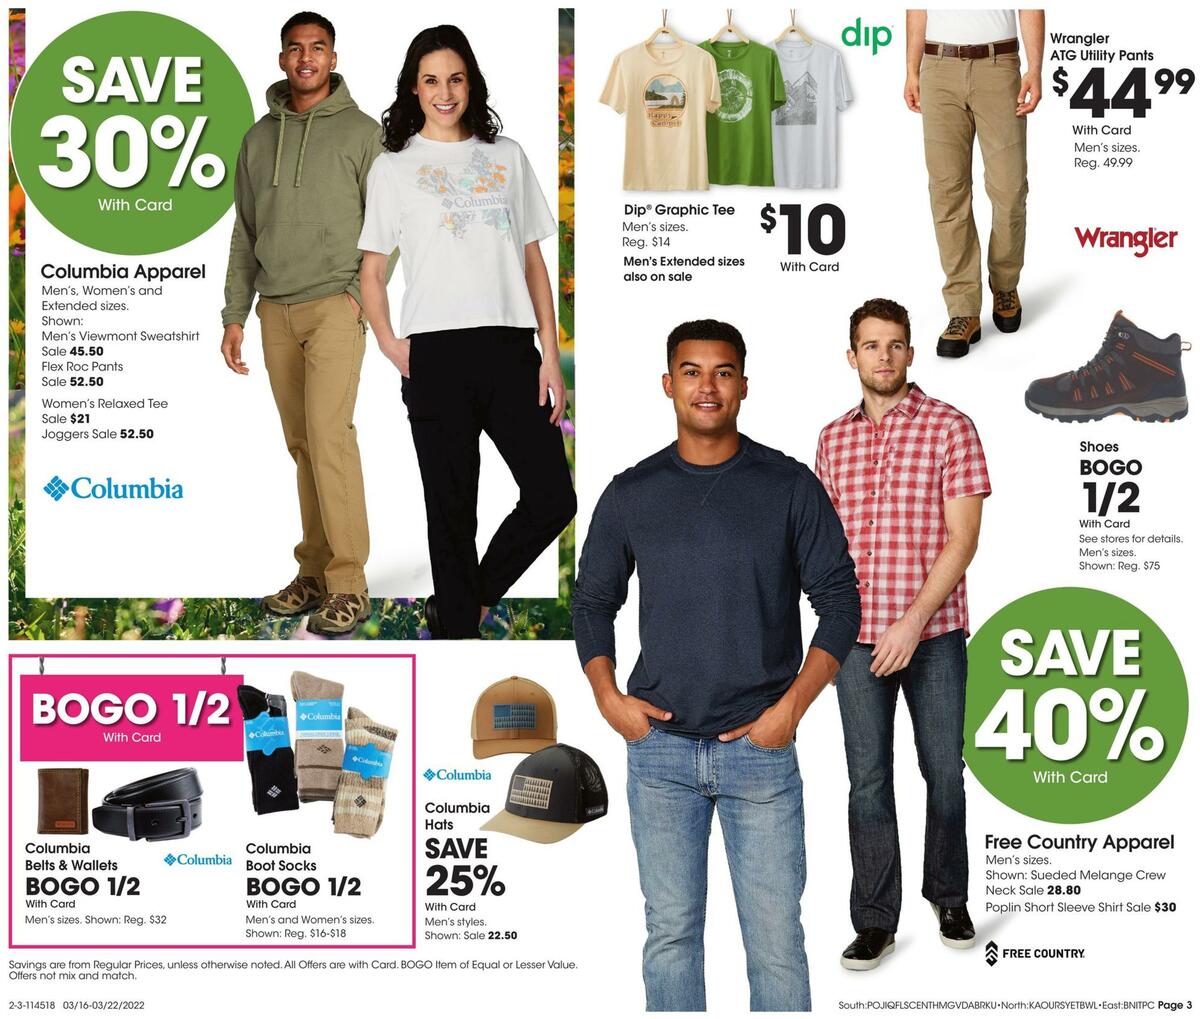 Fred Meyer General Merchandise Weekly Ad from March 16